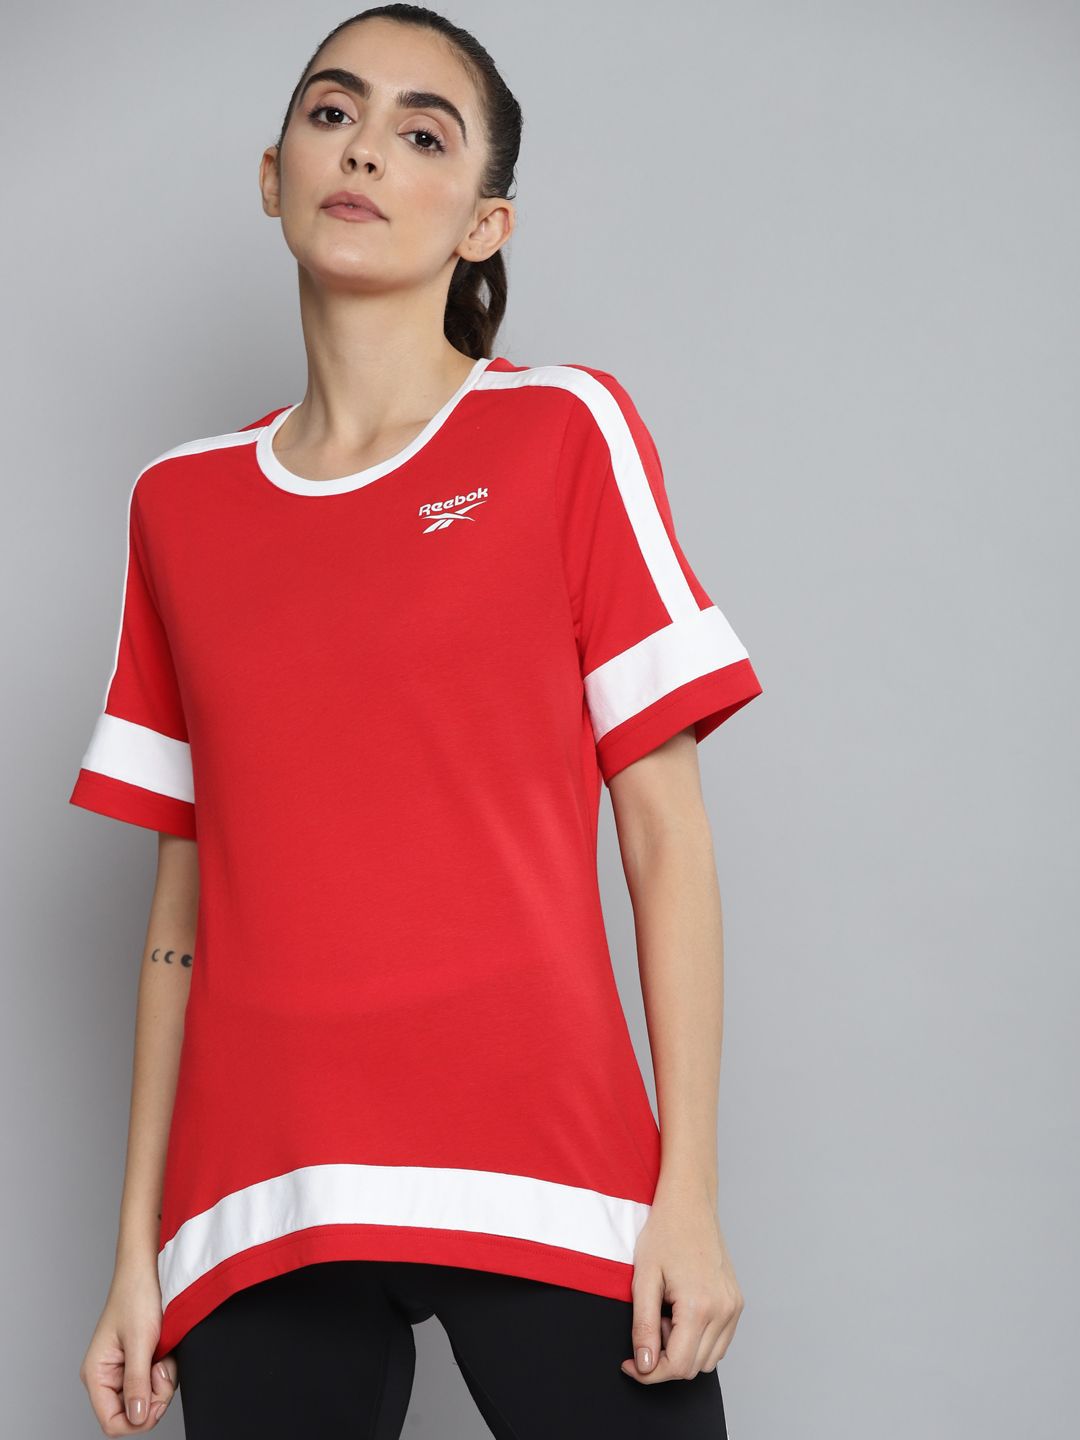 Reebok Classic Women Red WCE T-shirt Price in India